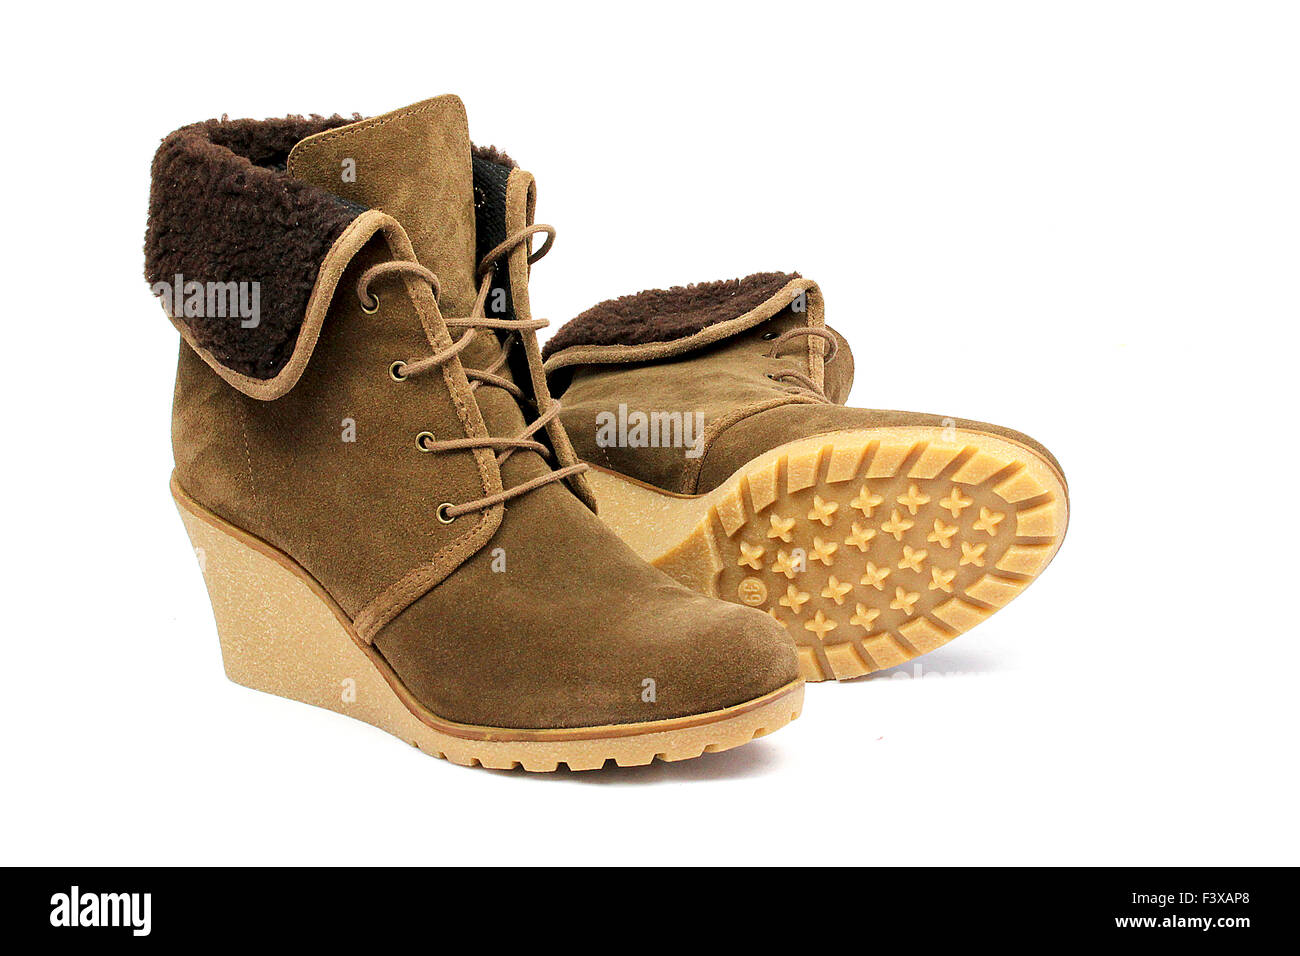 wedge heels boots for woman Stock Photo - Alamy